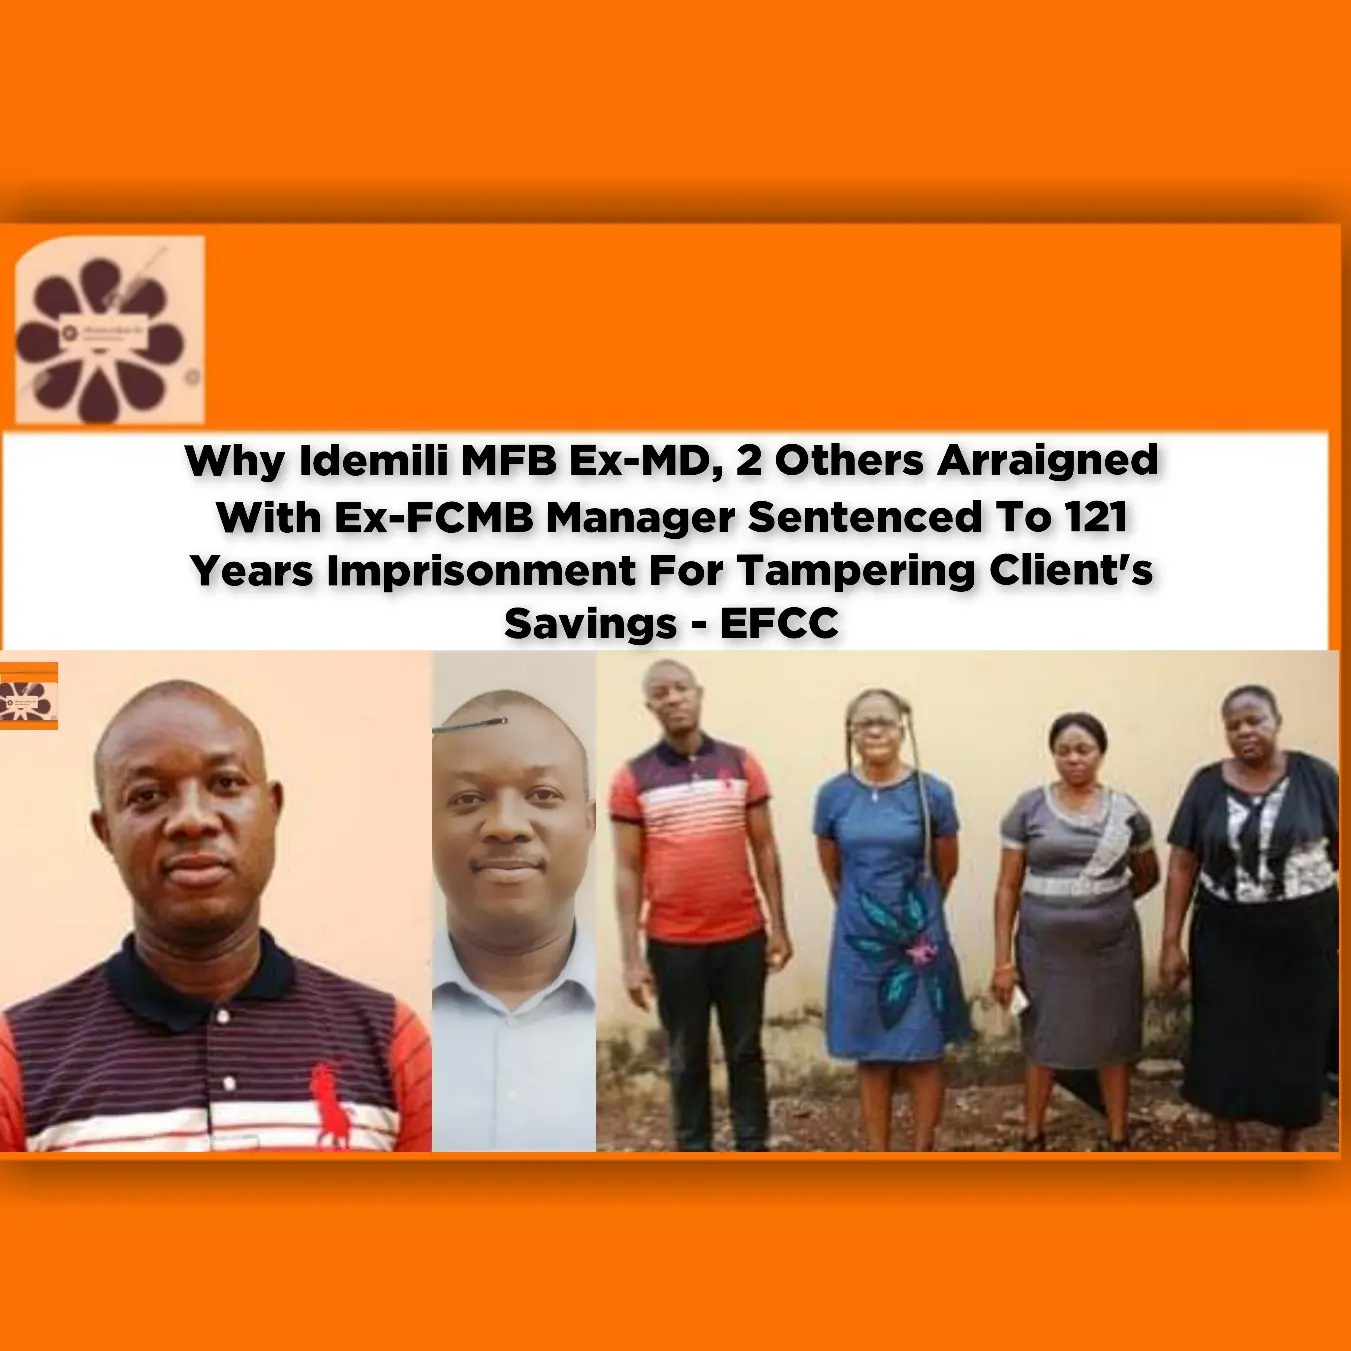 Why Idemili MFB Ex-MD, 2 Others Arraigned With Ex-FCMB Manager Sentenced To 121 Years Imprisonment For Tampering Client's Savings - EFCC ~ OsazuwaAkonedo #Amaechi